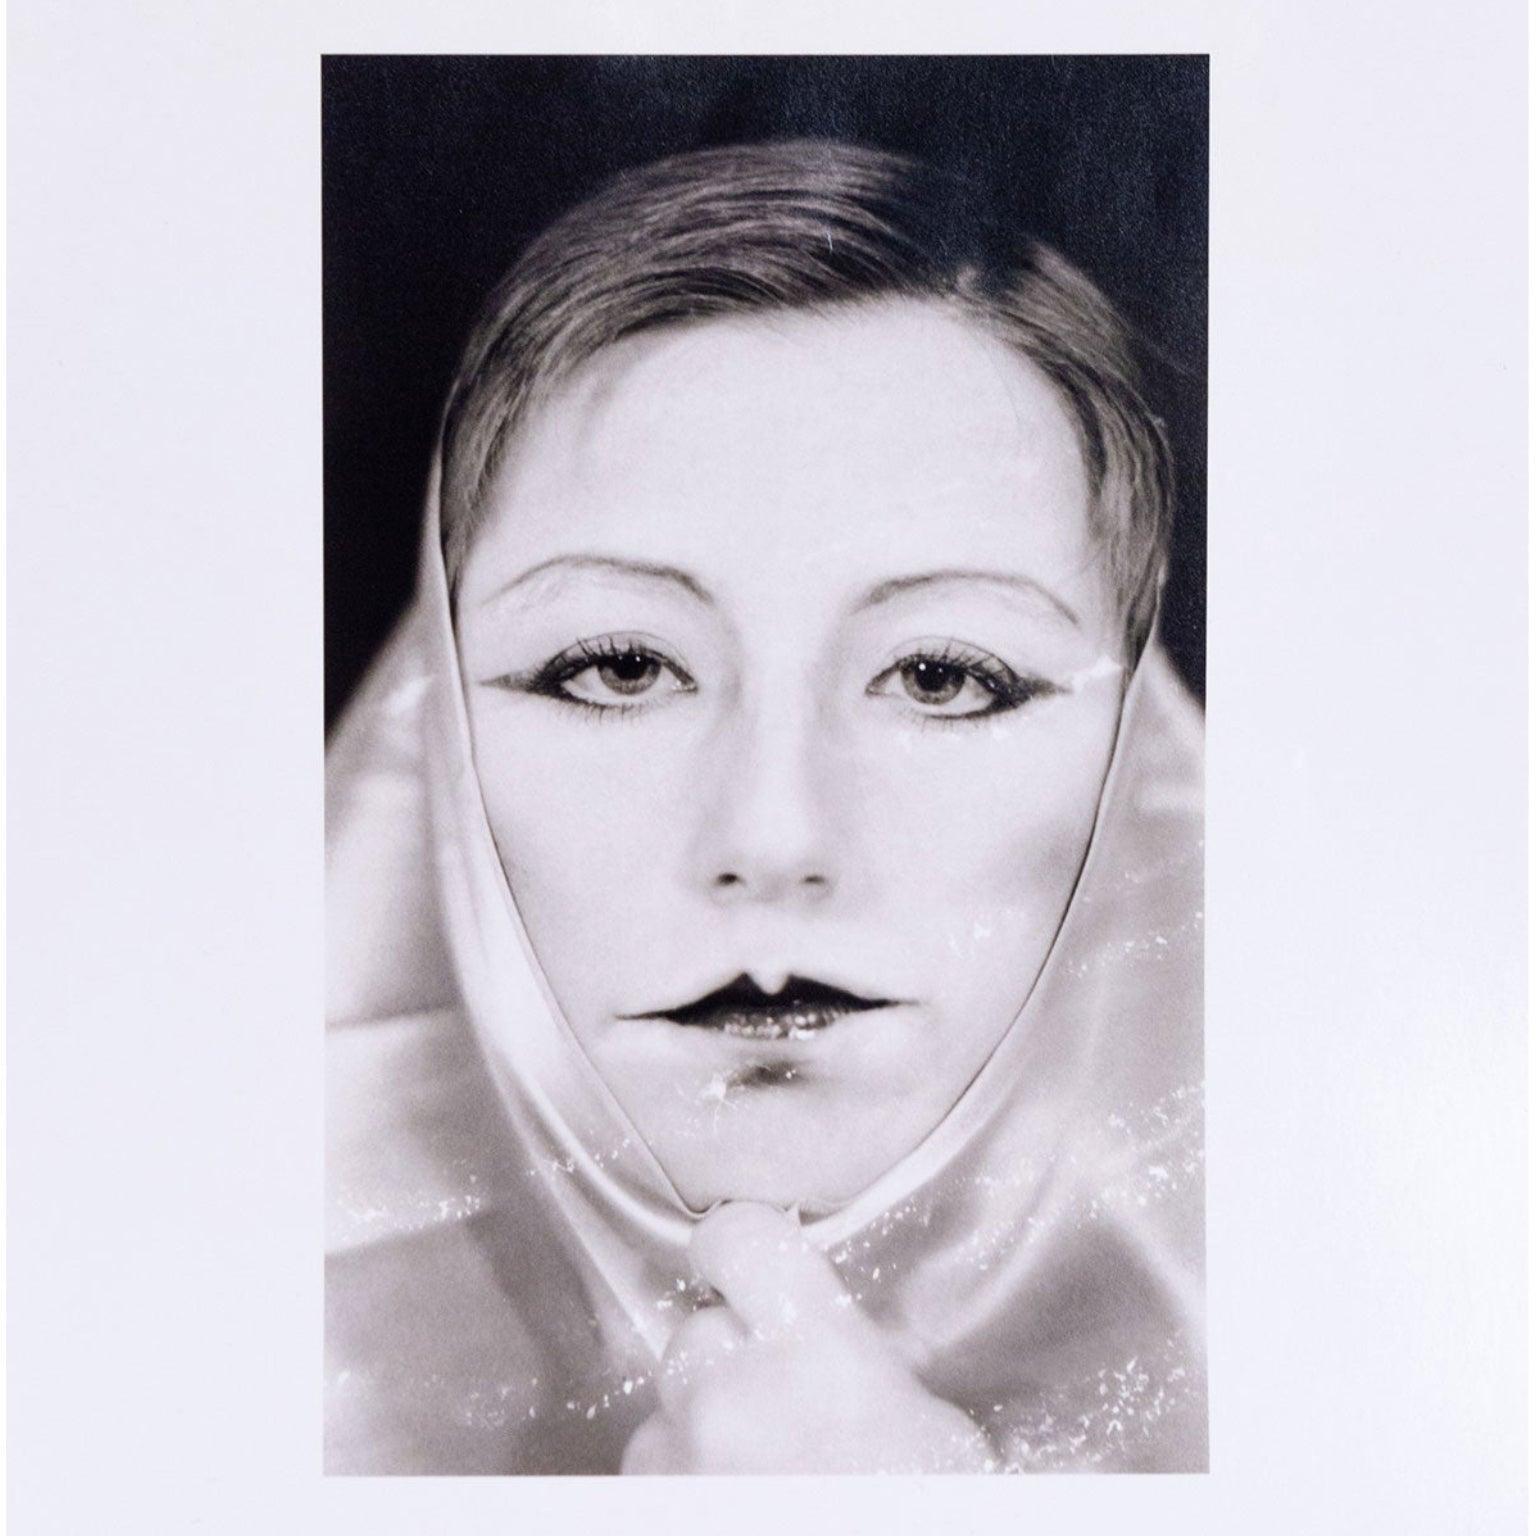 Untitled (Homage to Claude Cahun) - Photograph by Cindy Sherman